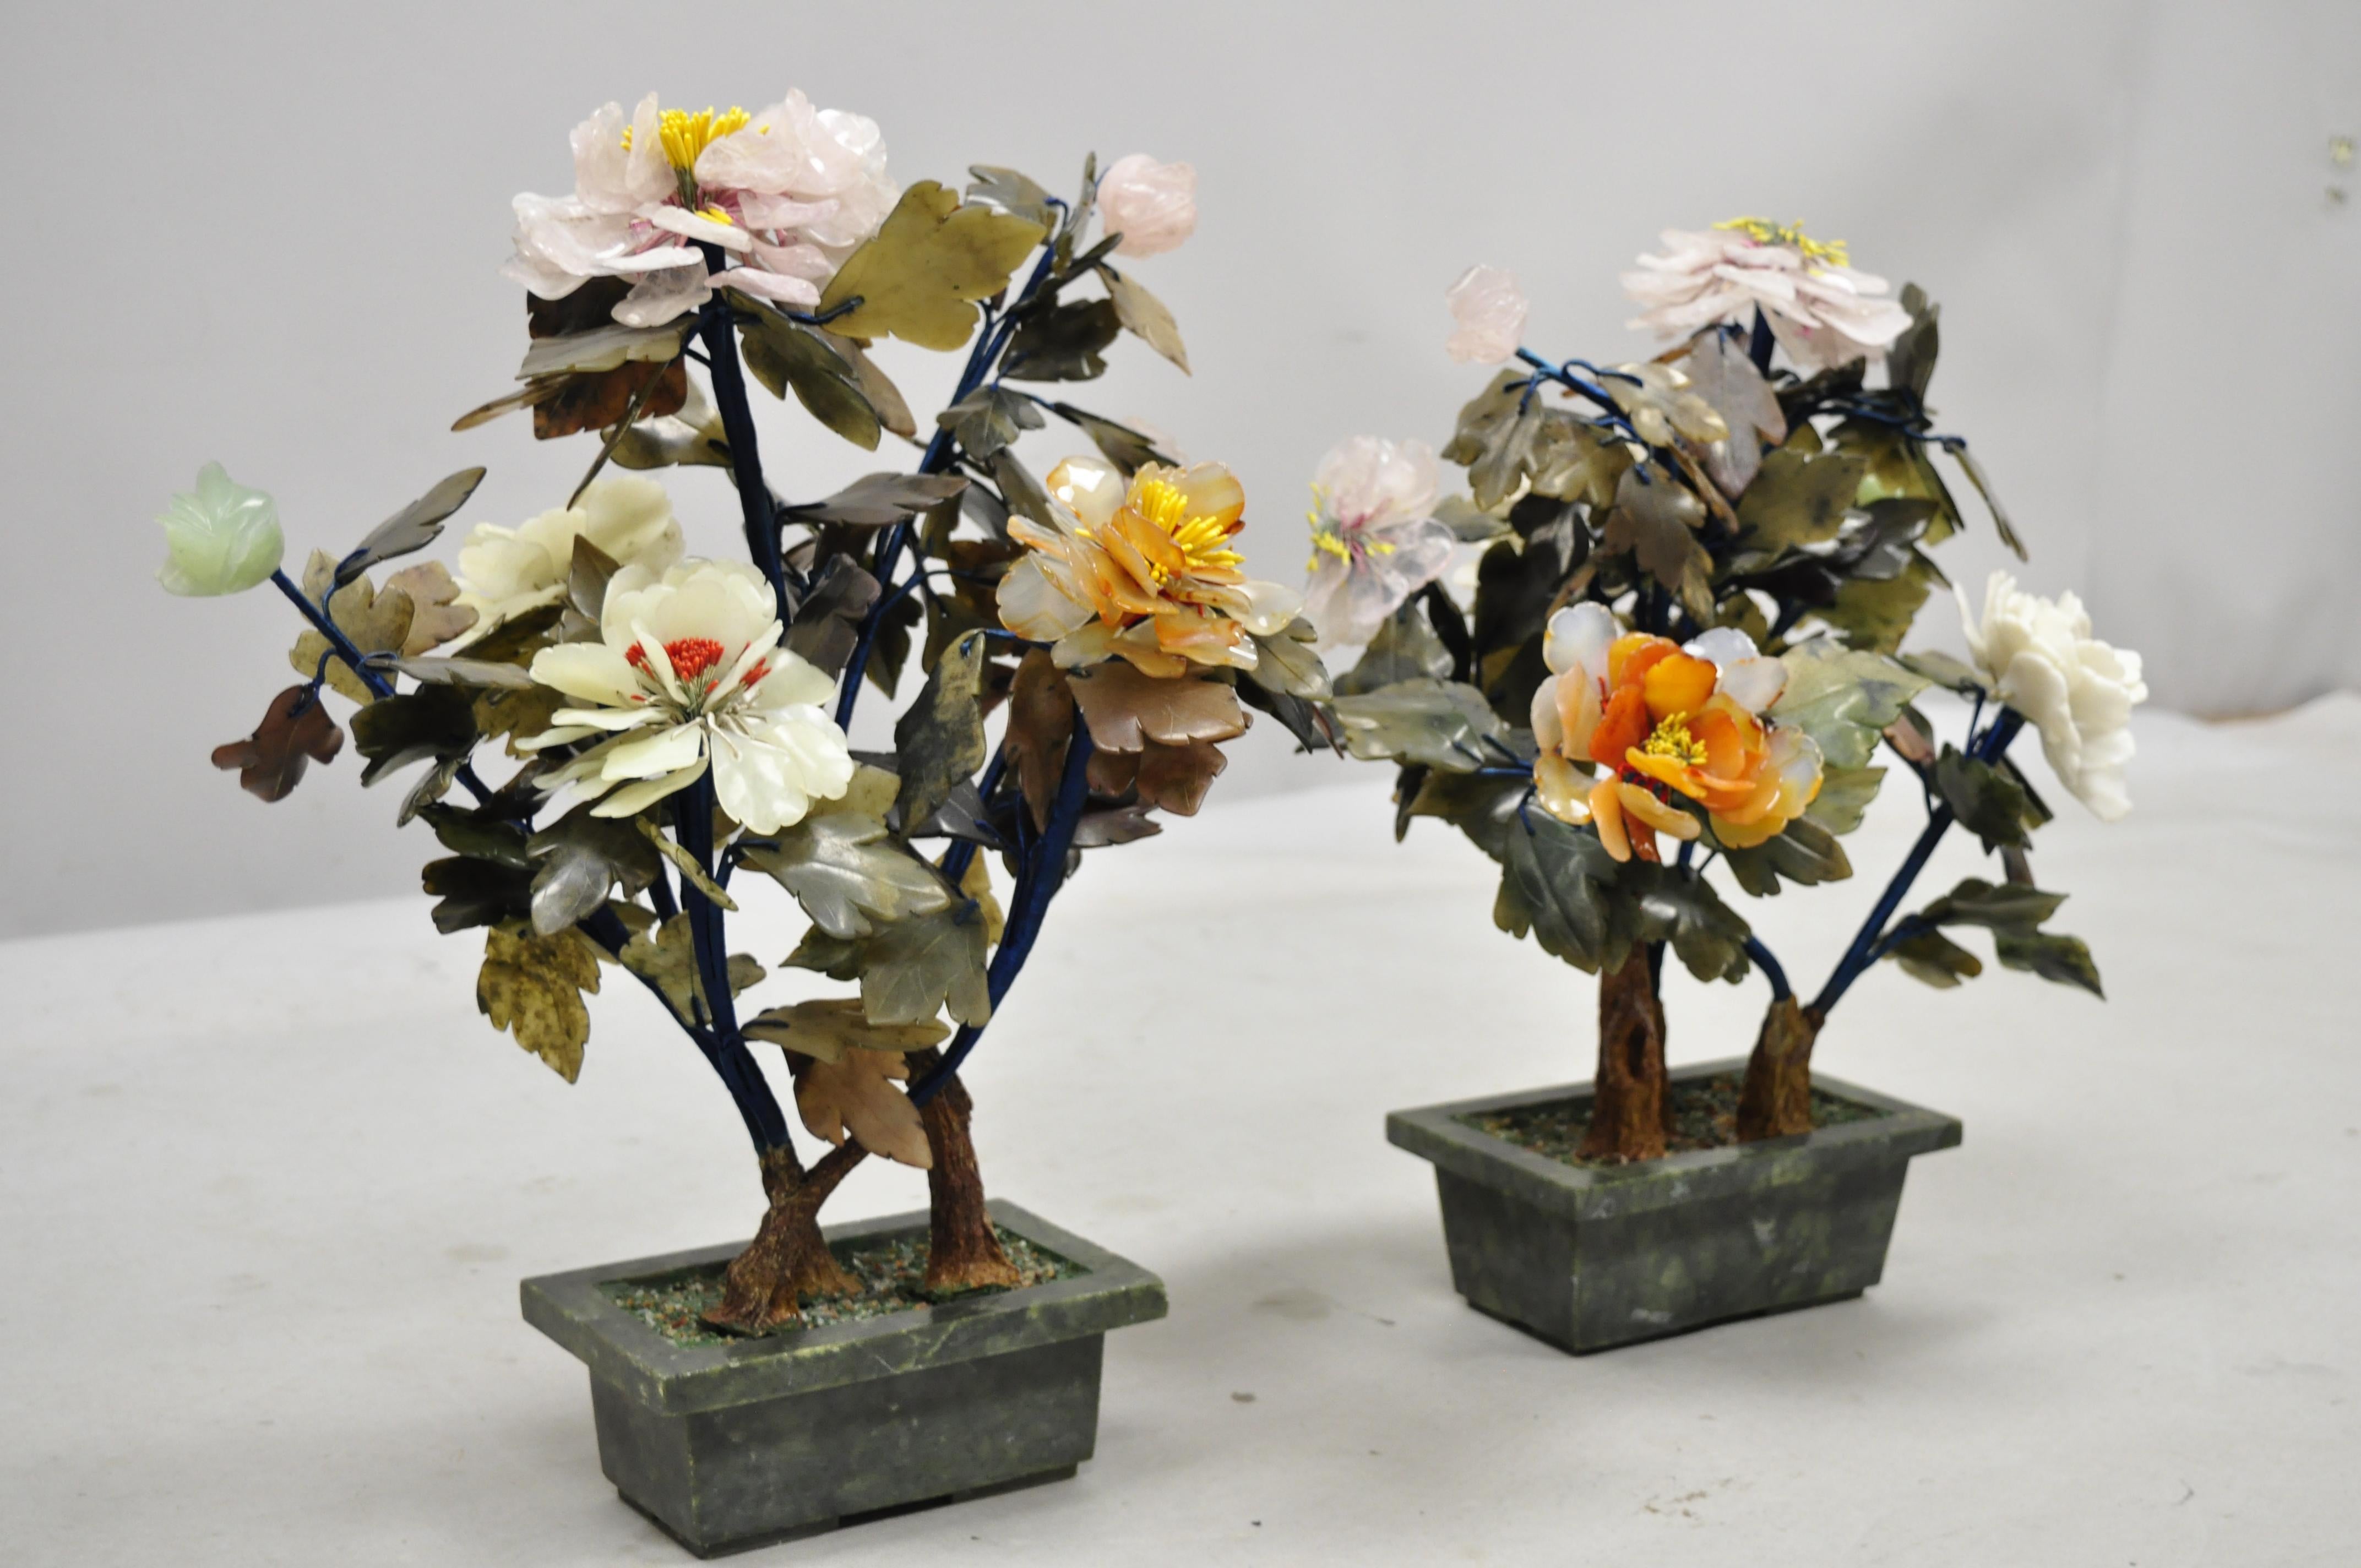 Pair of vintage glass and soapstone flower bonsai tree centerpiece sculpture. Set includes art glass flowers, soapstone flower pots, beautiful color, soapstone leaves, very nice vintage set, circa late 20th century. Measurements: 17.5